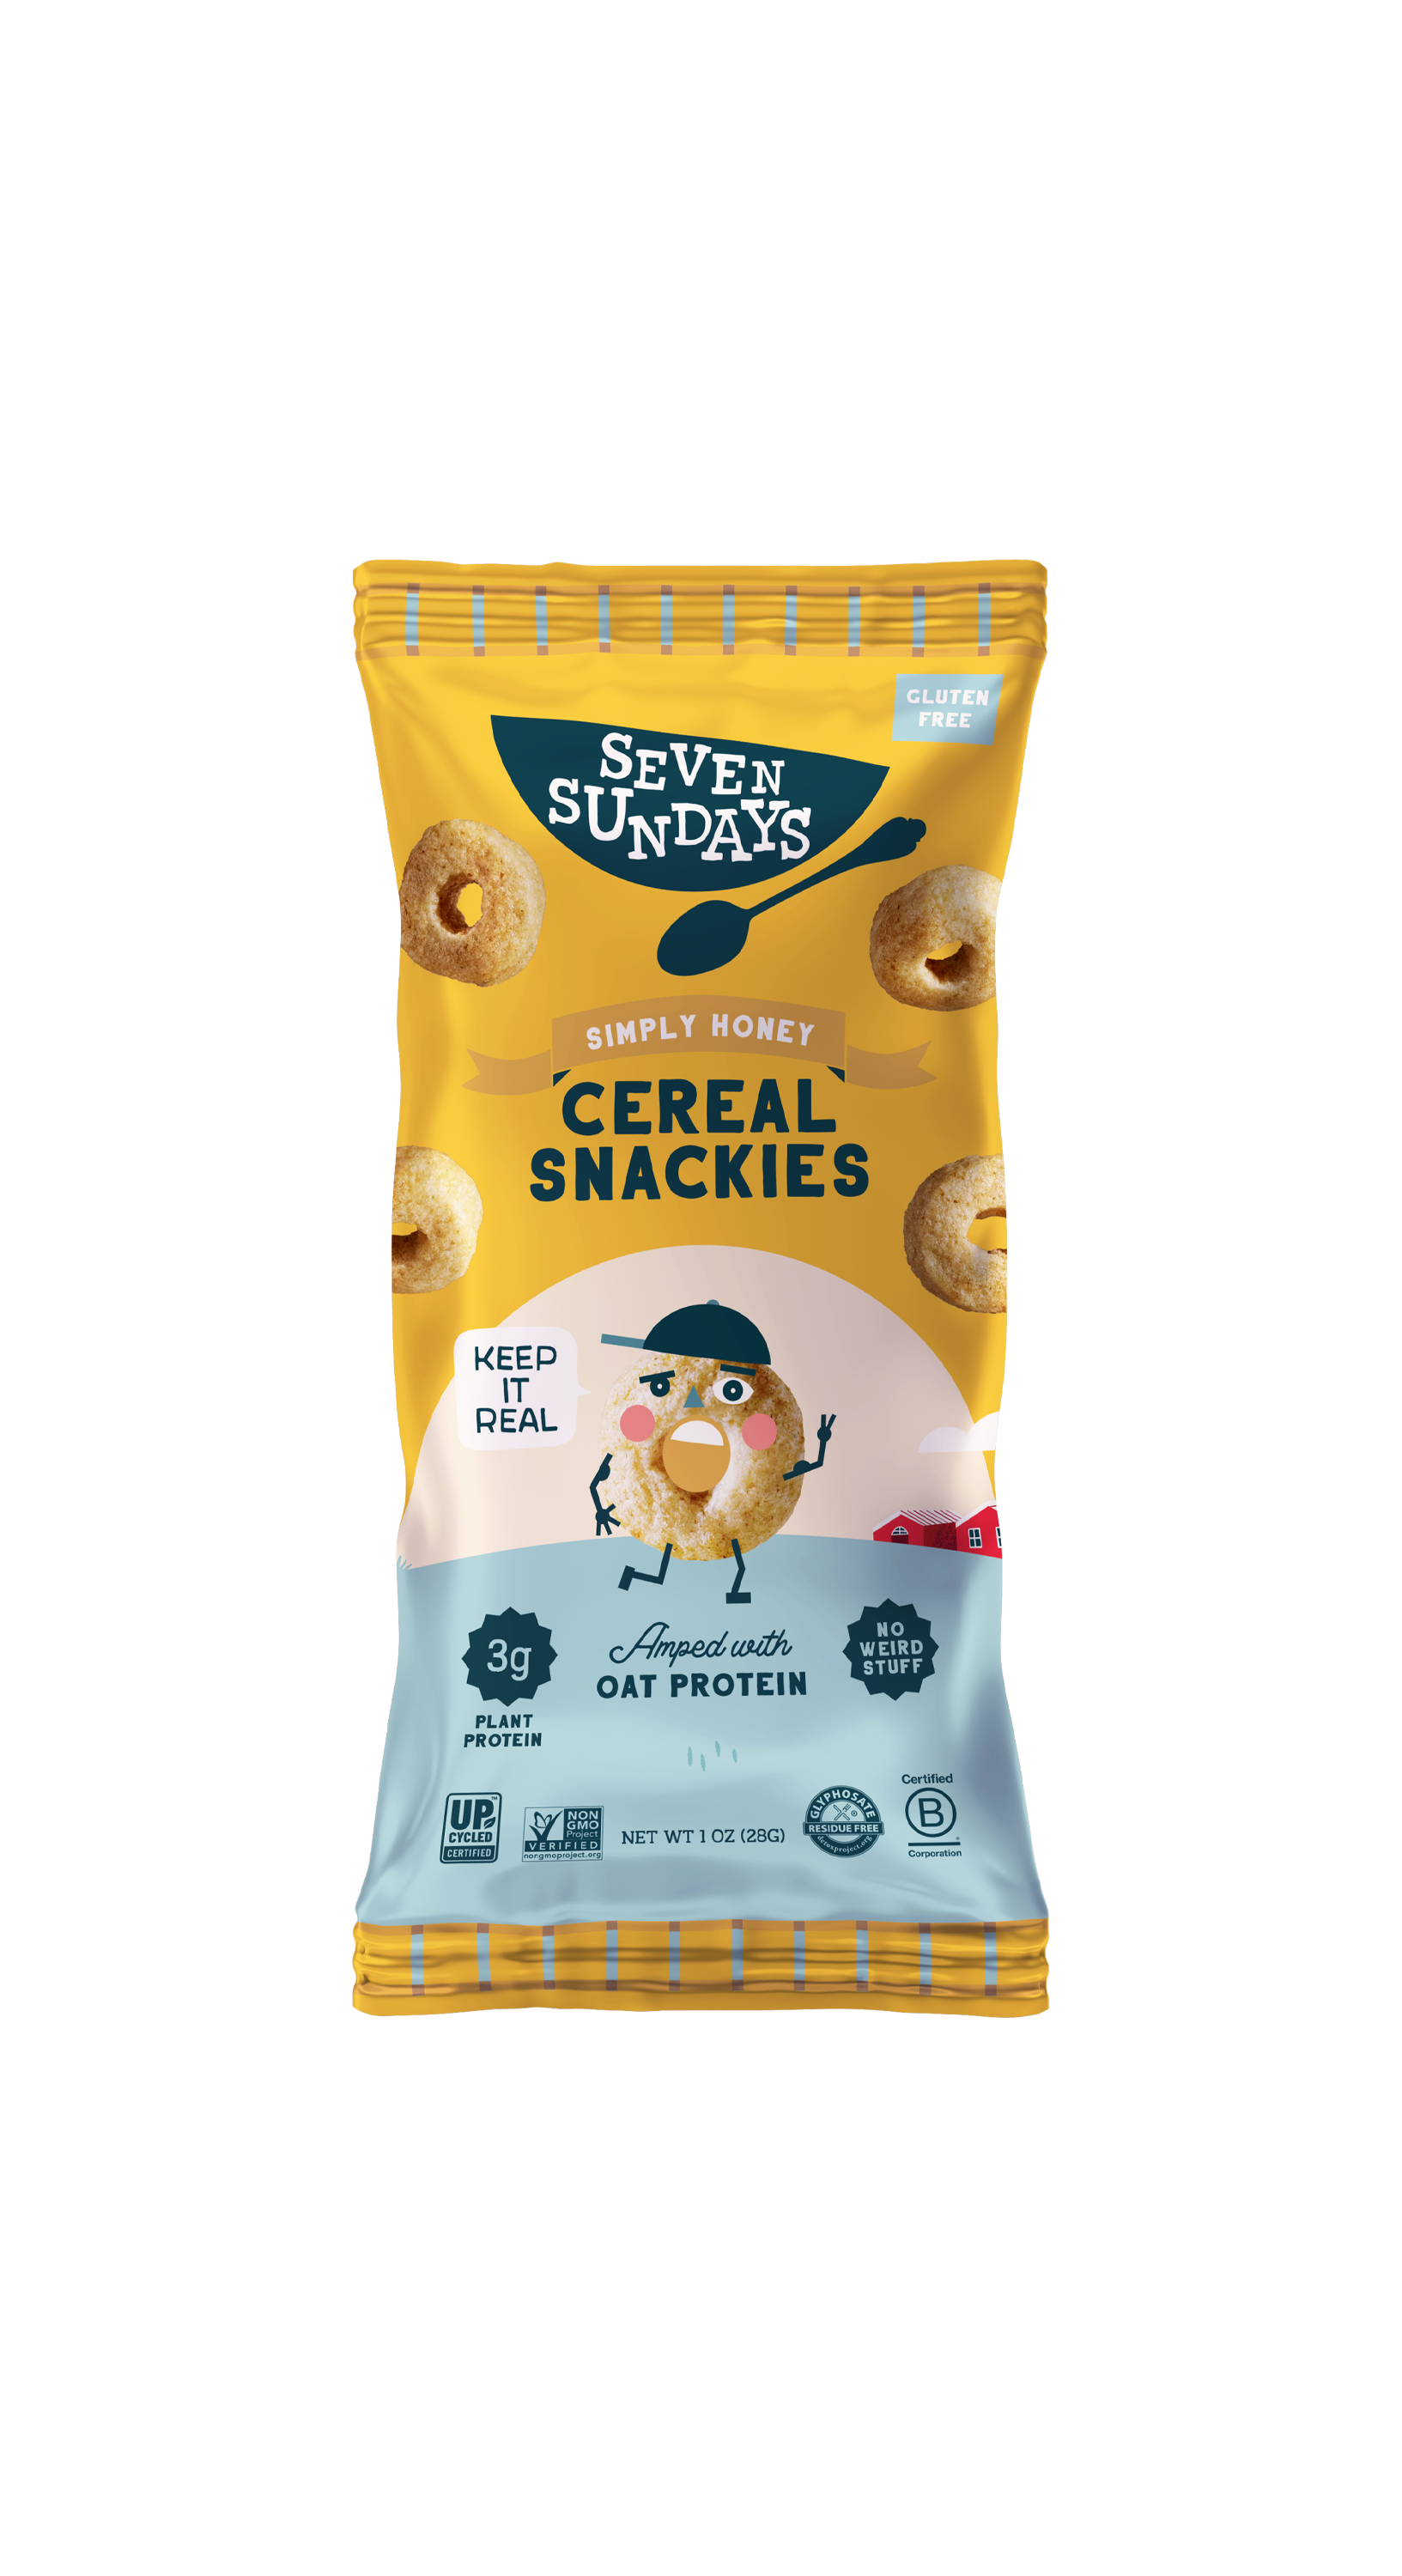 Simply Honey Cereal Snackies